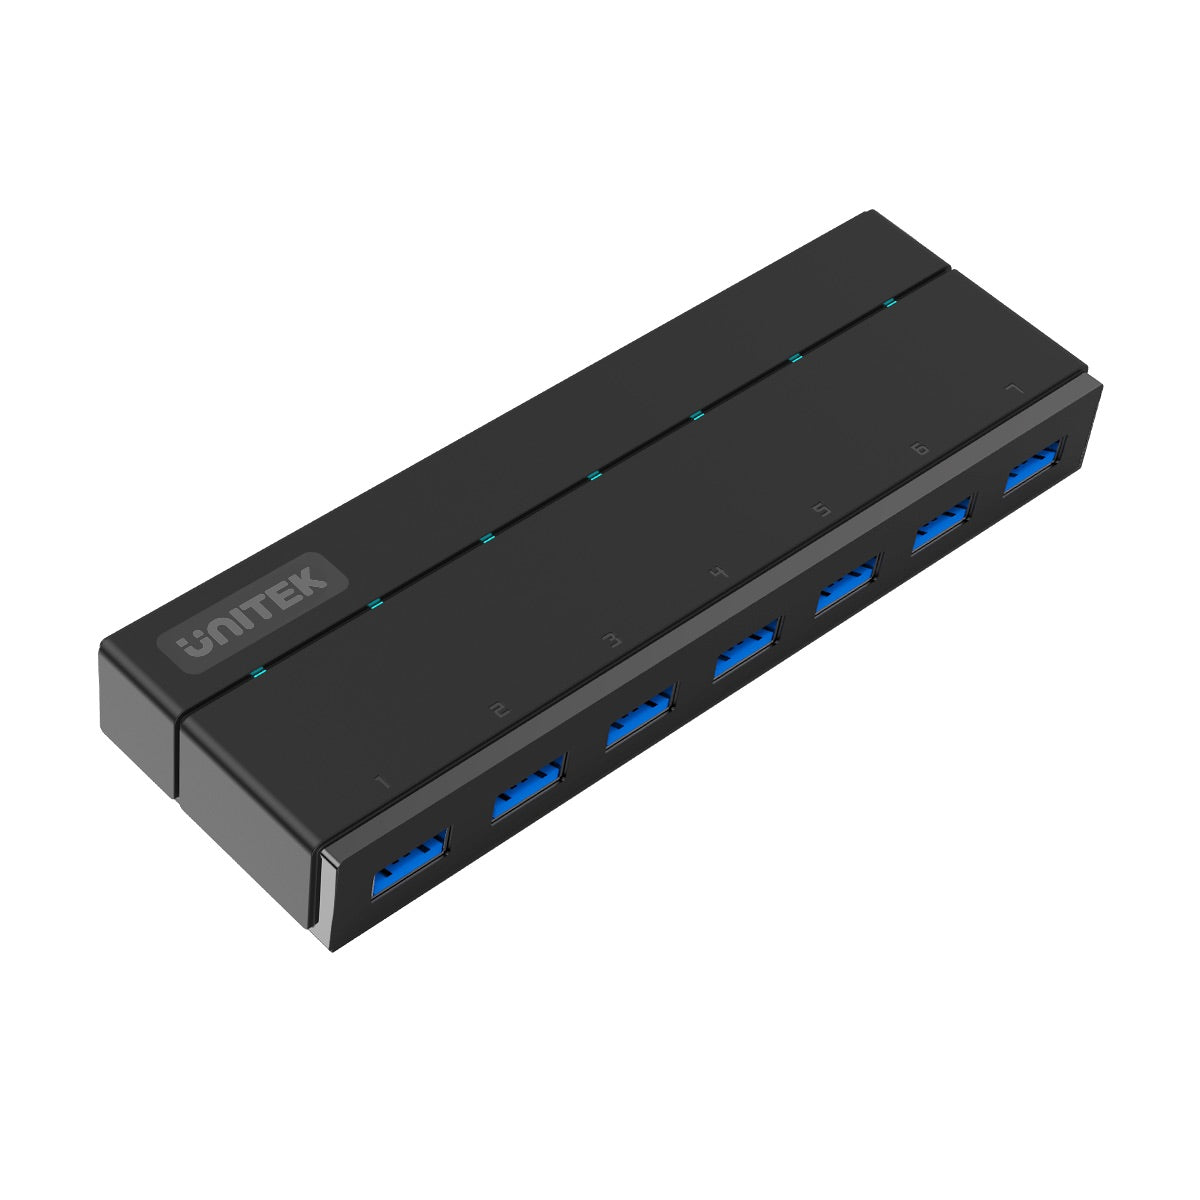 7 Ports Powered USB 3.0 Hub with USB-A Cable